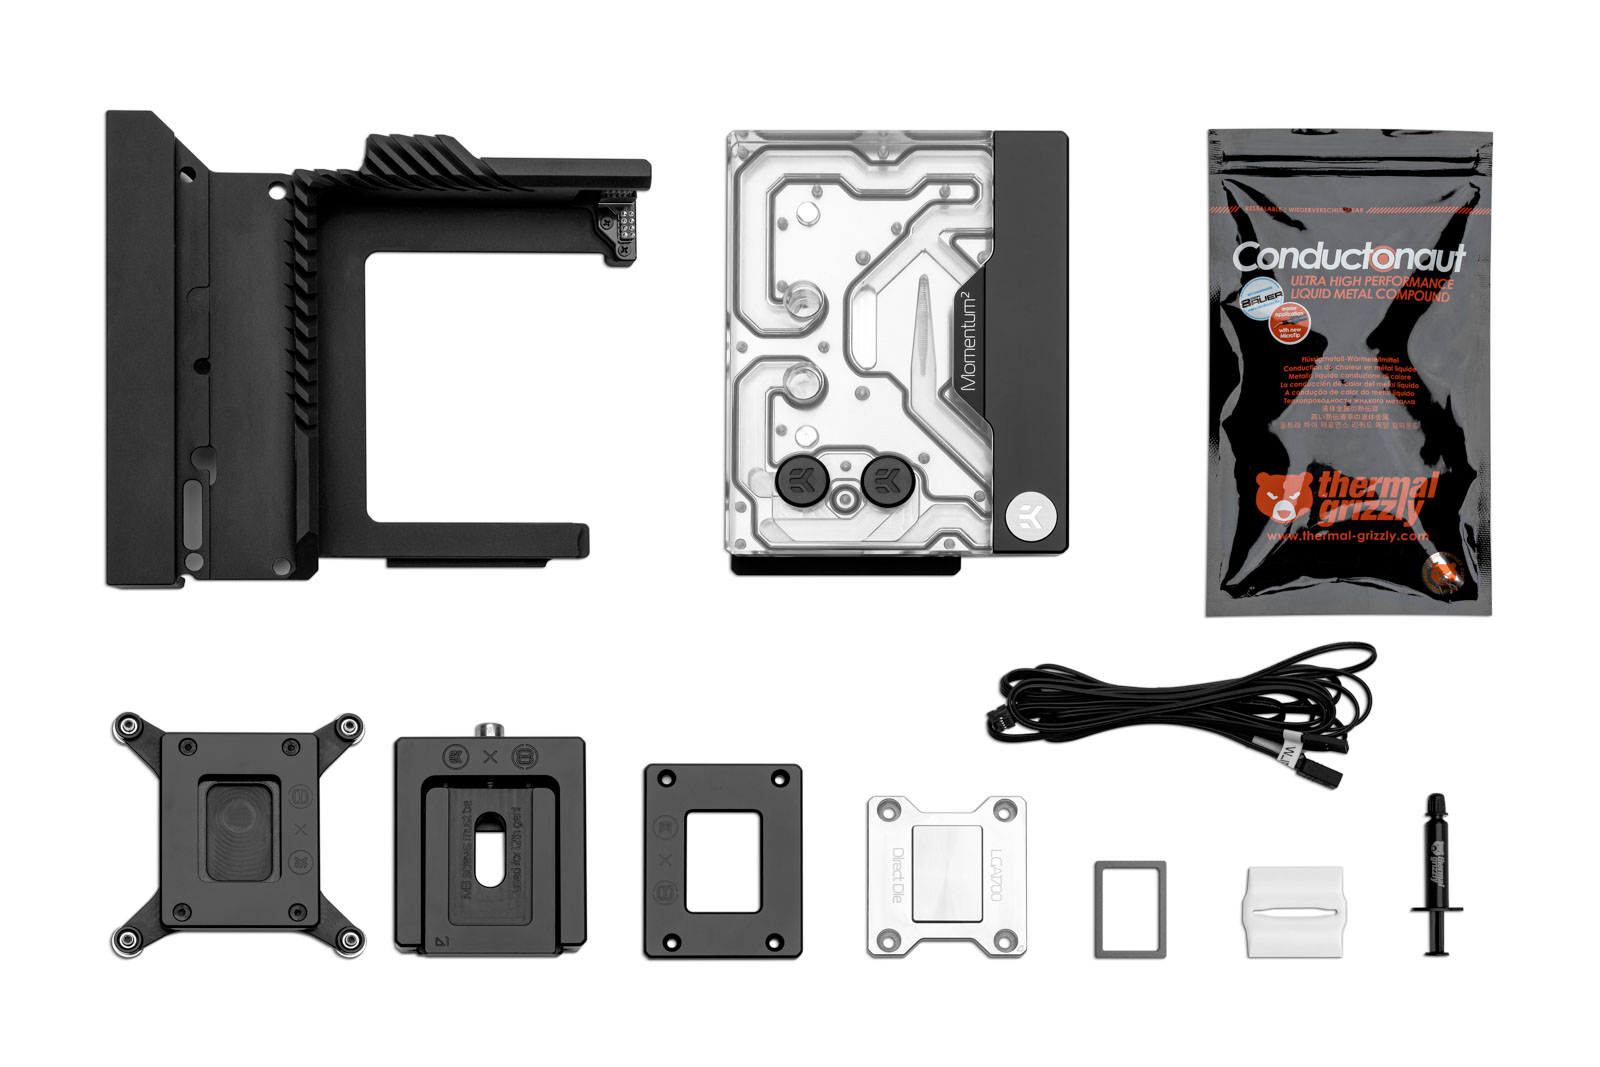 Special edition ultrablock-class product for ROG Maximus Z790 Extreme water cooling